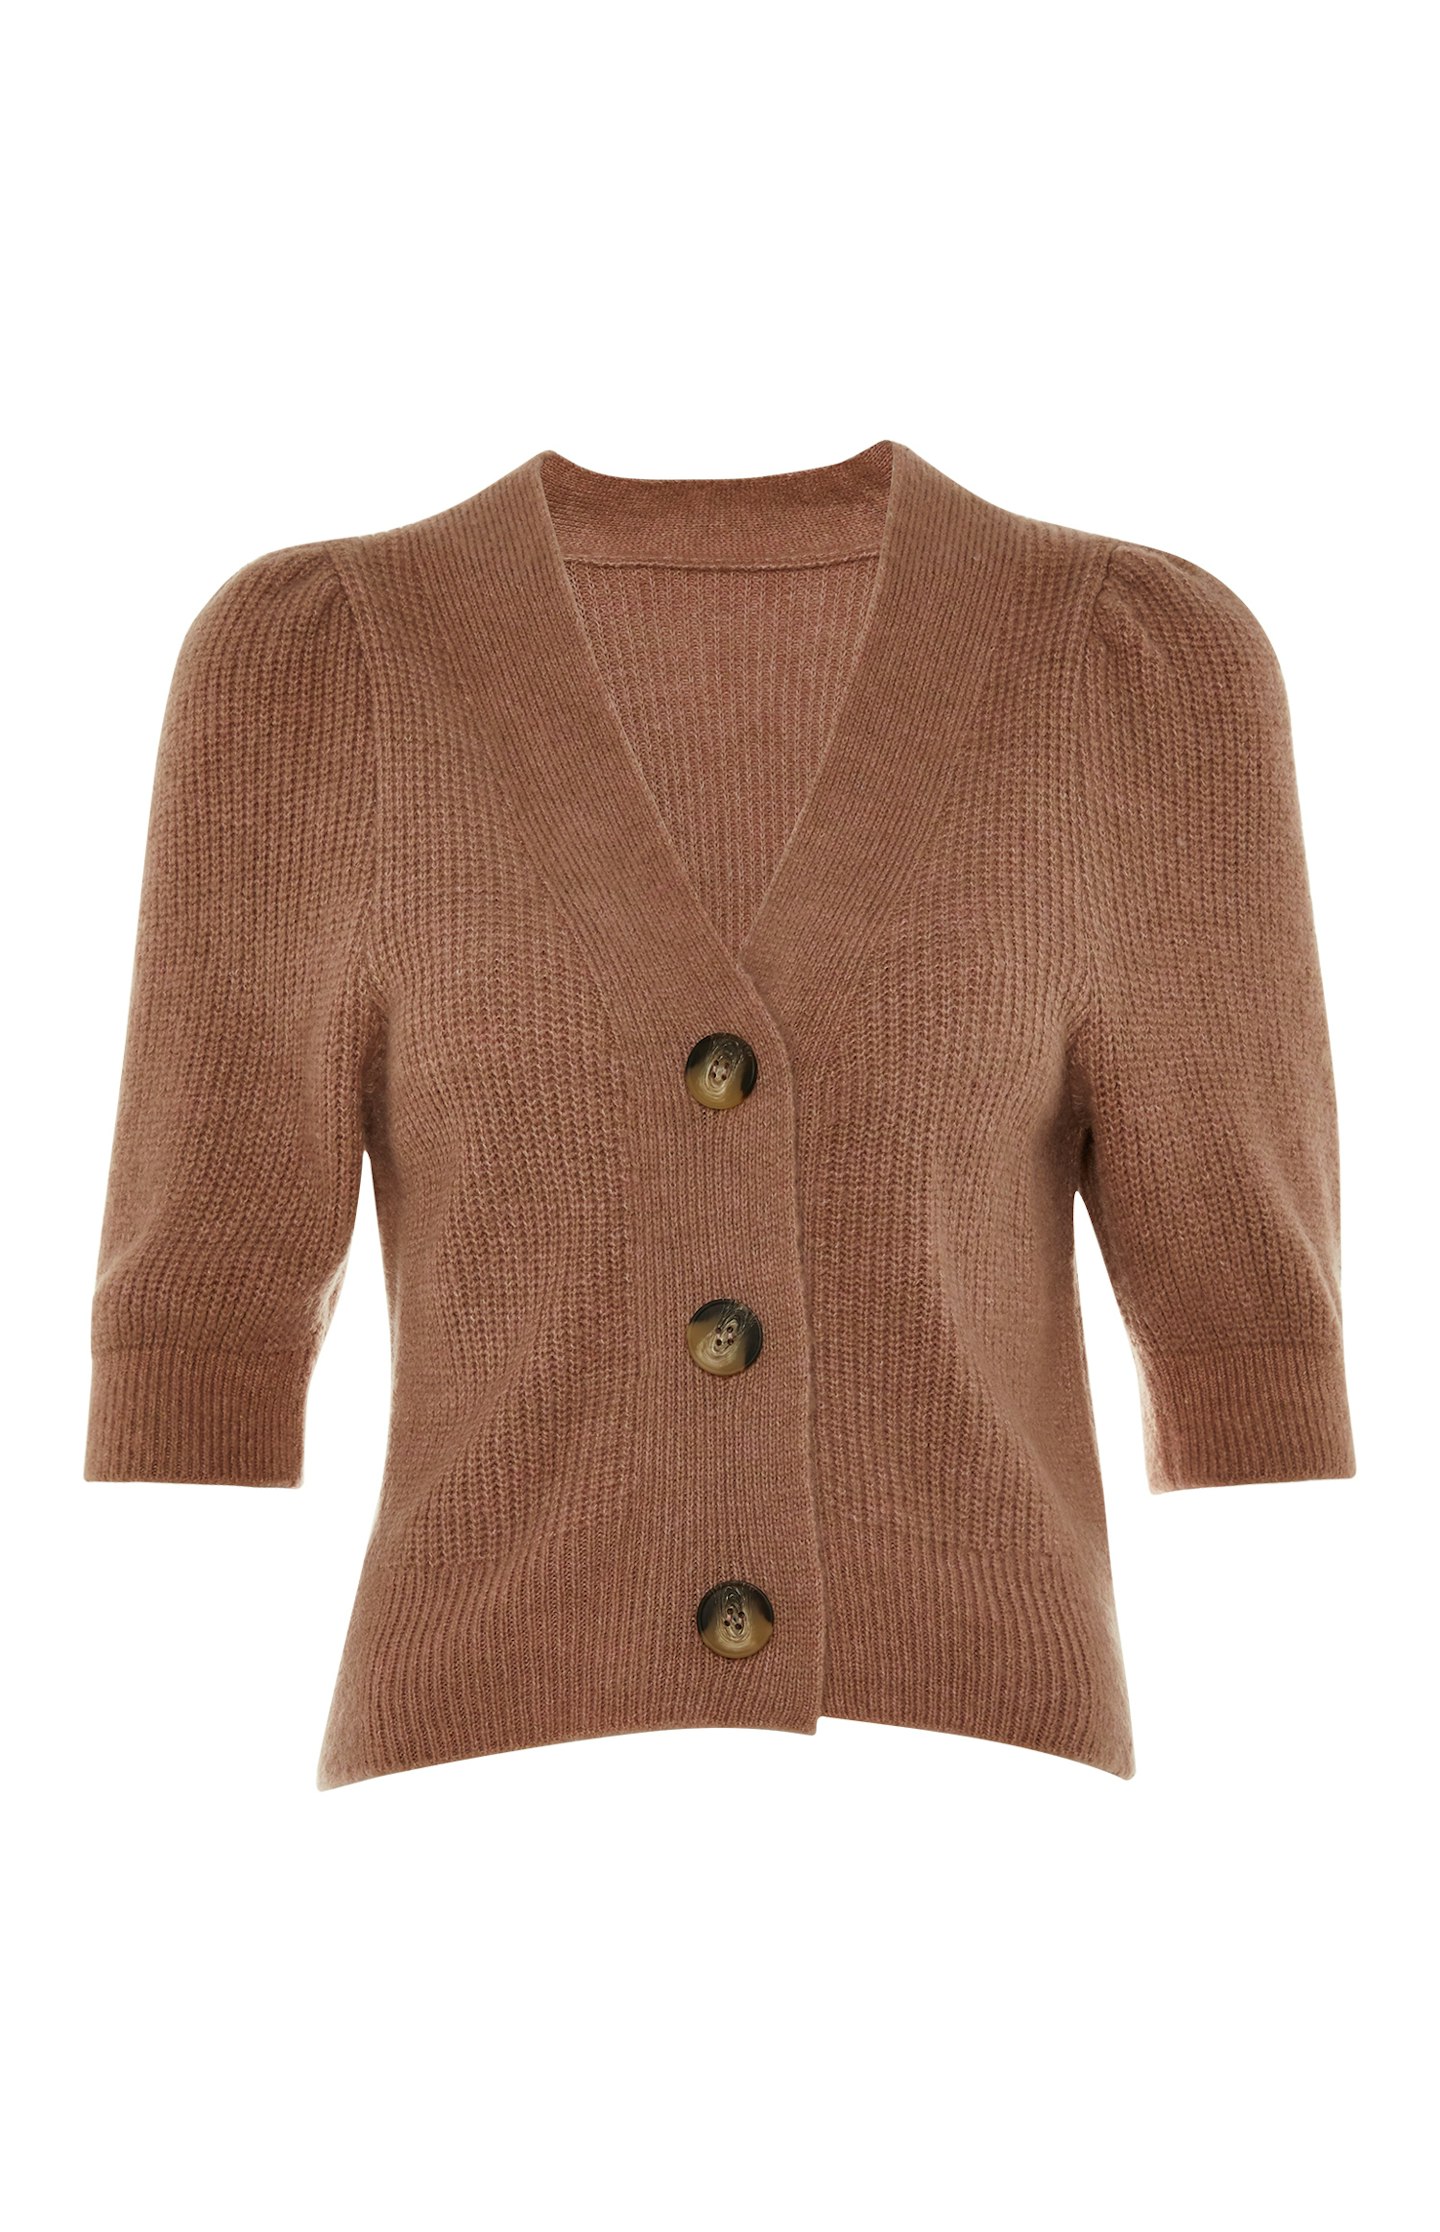 Primark, Rust Cardigan, £13, Available In-Store Next Week